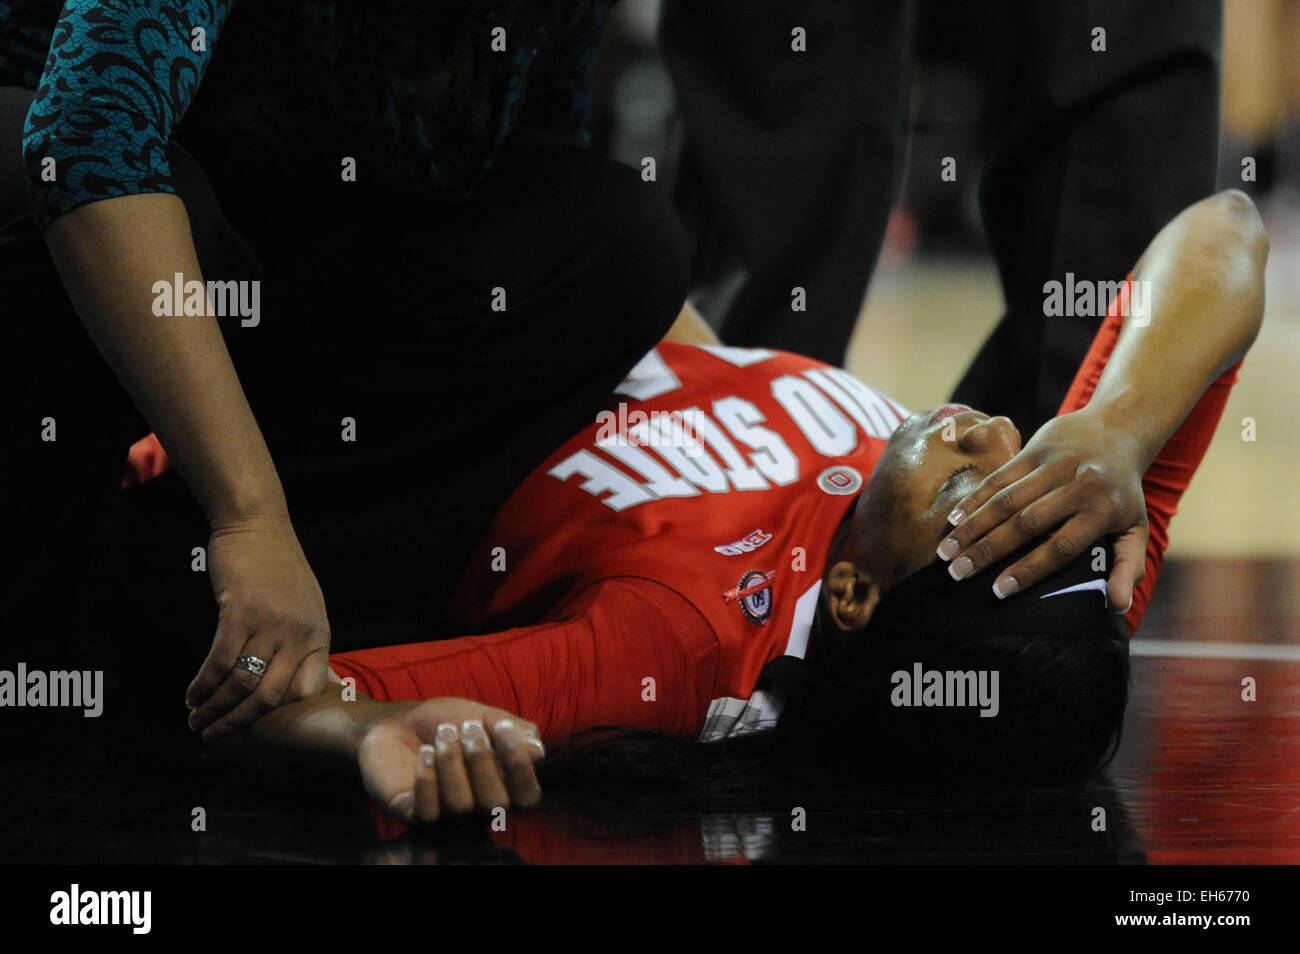 Hoffman Estates, IL, USA. 7th Mar, 2015. Ohio State Buckeyes guard Ameryst Alston (14) lays on the court after an injury in the first half during the 2015 Big Ten Women's Basketball Tournament game between the Iowa Hawkeyes and the Ohio State Buckeyes at the Sears Centre in Hoffman Estates, IL. Patrick Gorski/CSM/Alamy Live News Stock Photo